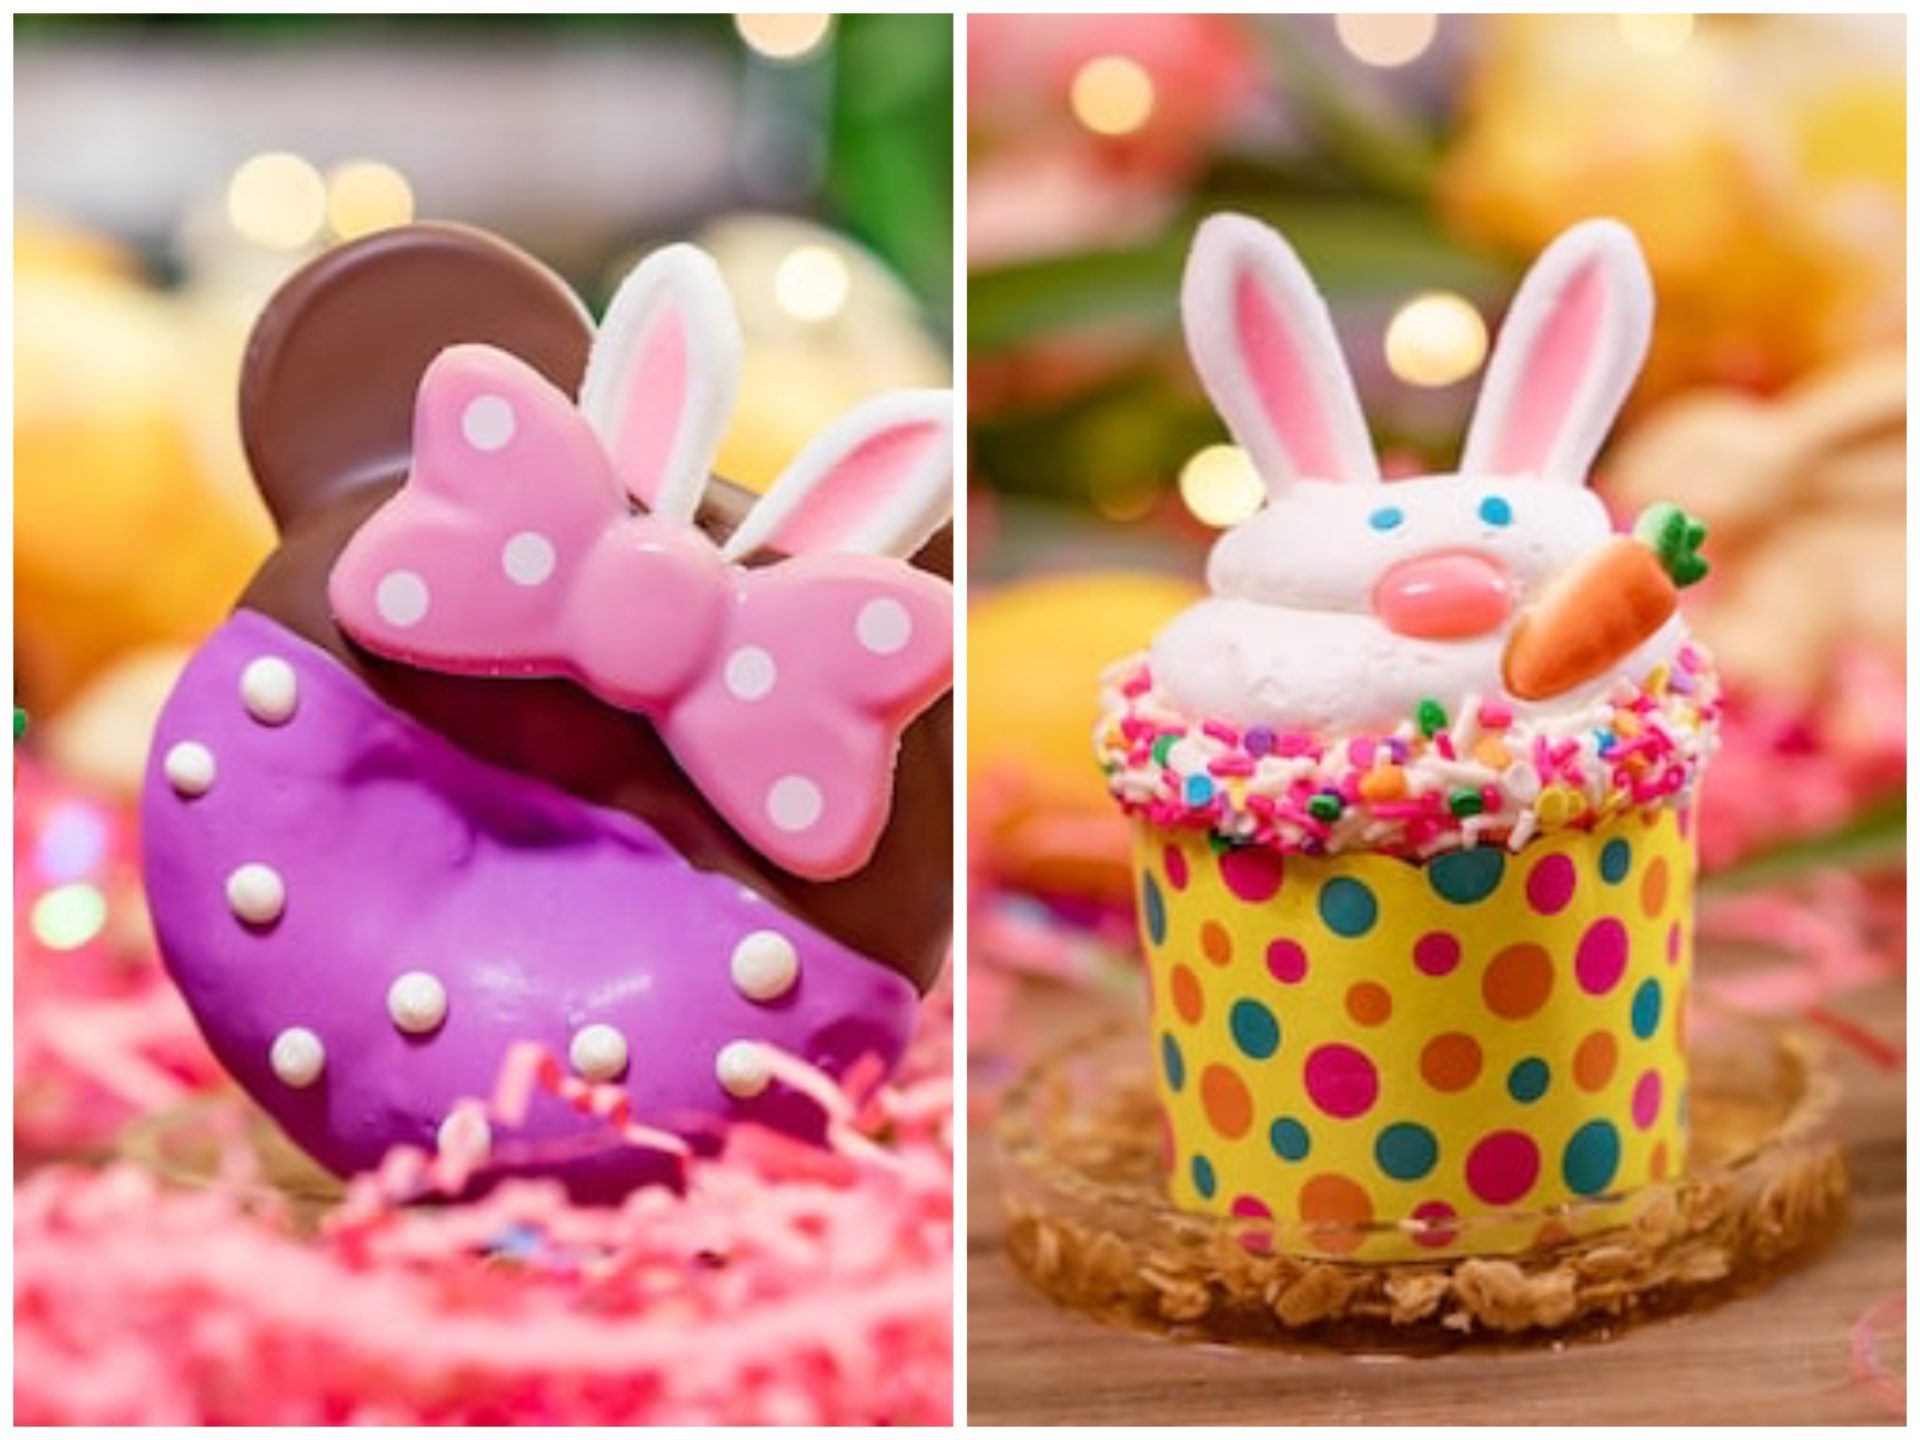 Easter comes to the Disneyland Resort, Hong Kong Disneyland, and Tokyo Disneyland